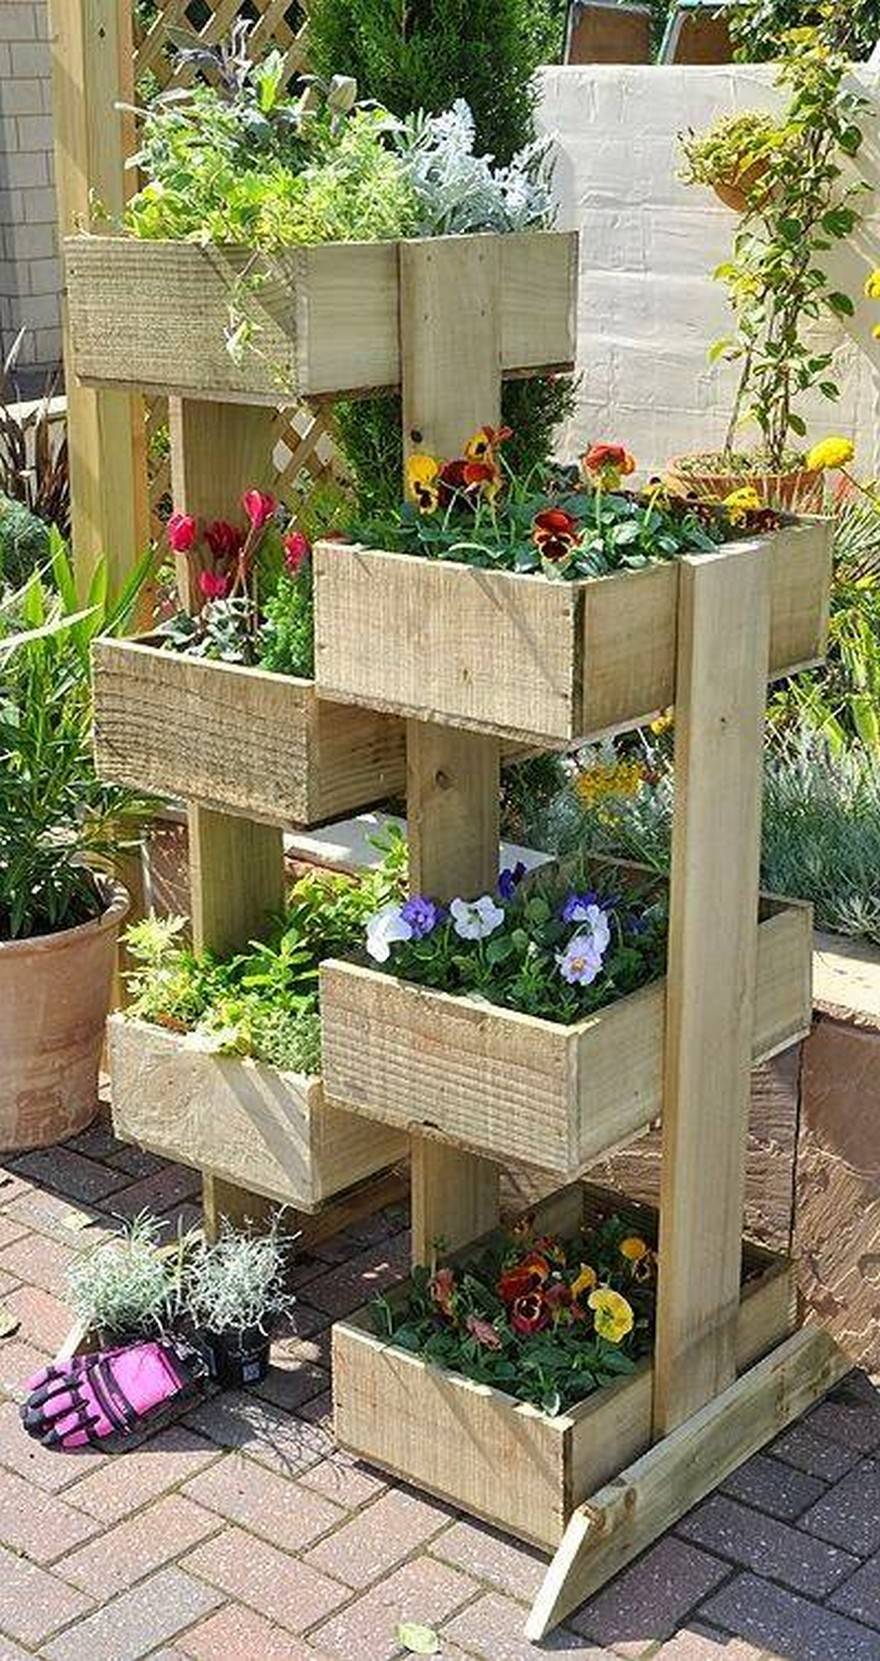 Spectacular Recycled Wood Pallet Garden Ideas